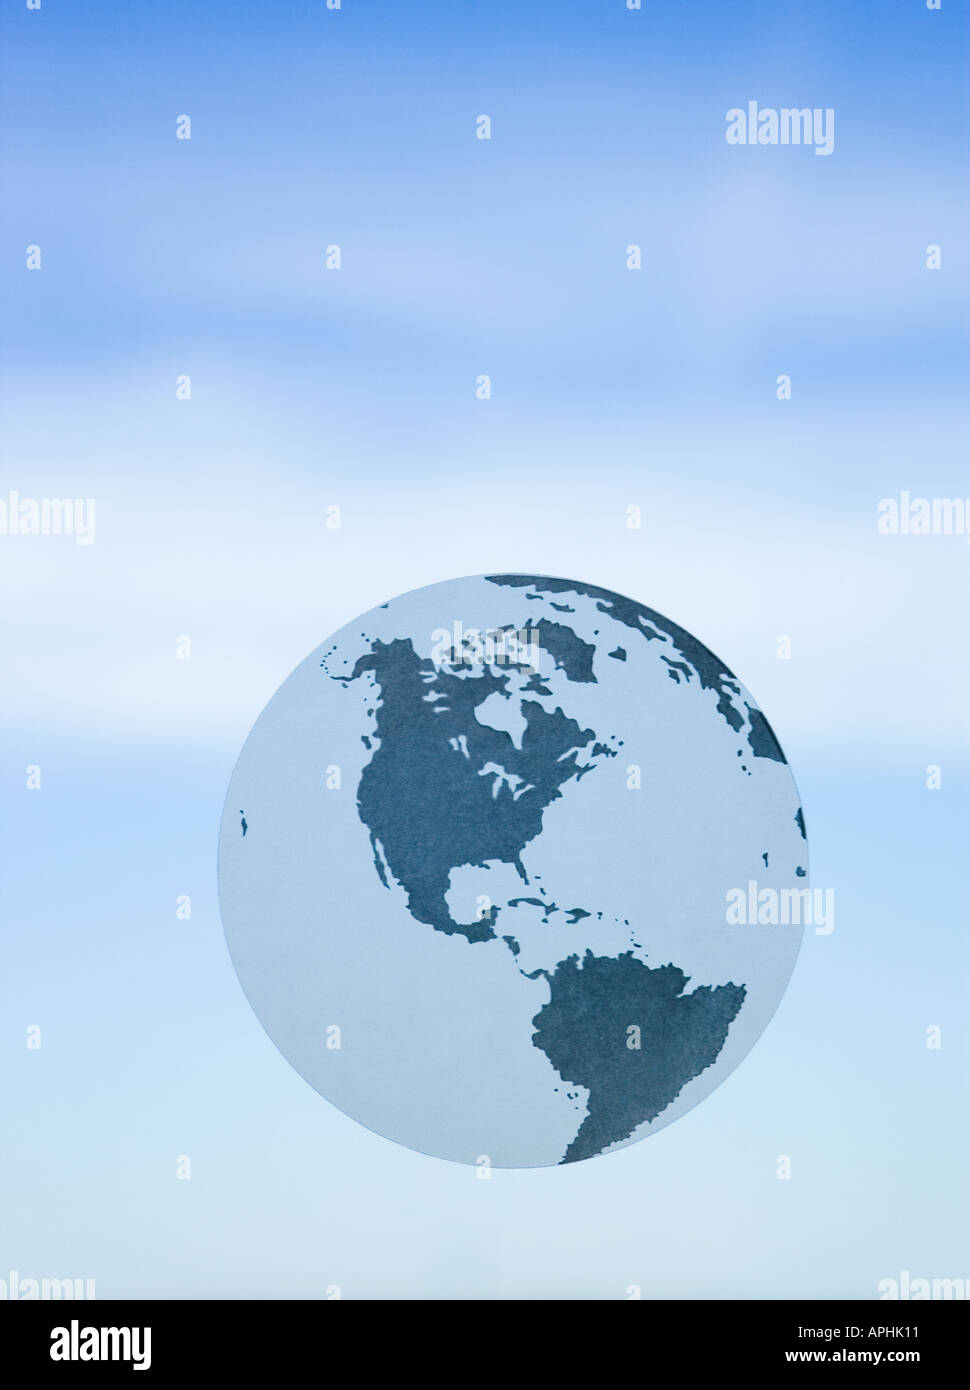 Planet Earth – white frosted image in blue sky. View of the Americas. Open sky in the background. Stock Photo